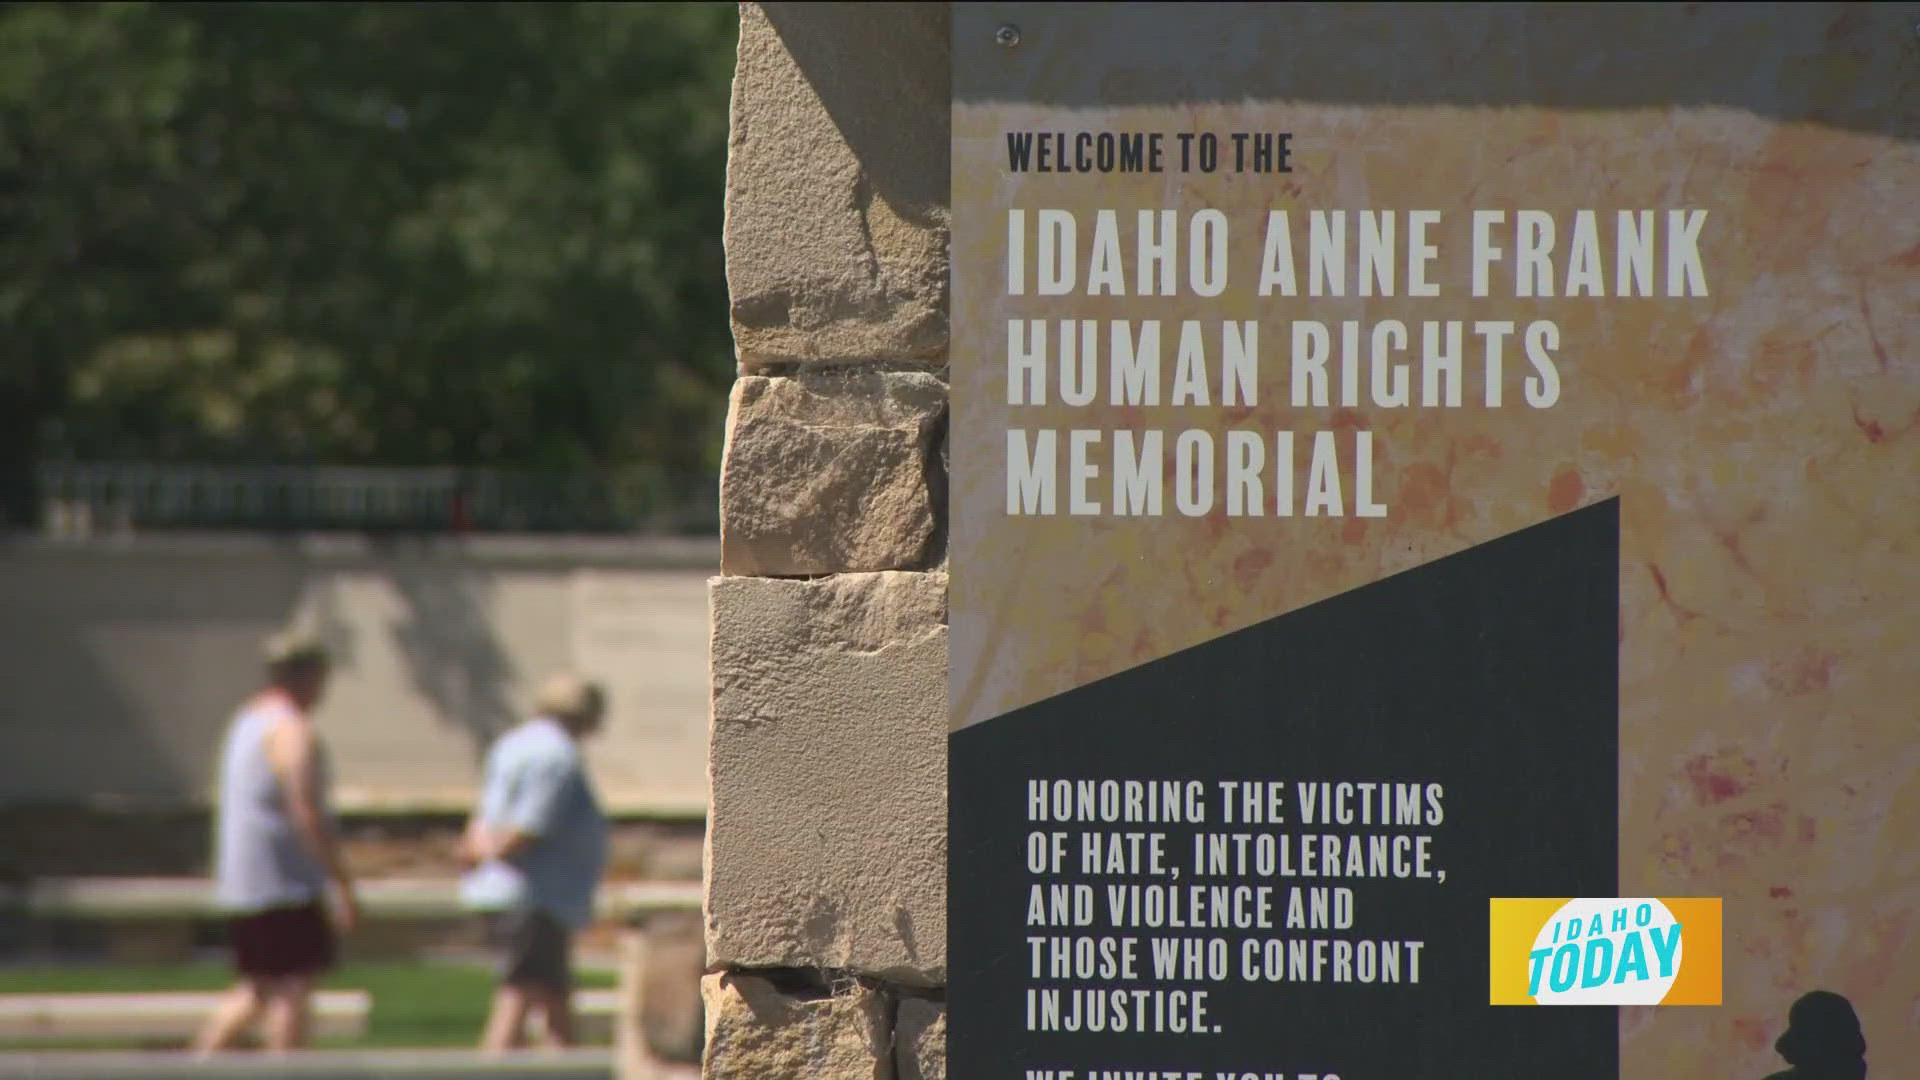 Founded in 1996, The Wassmuth Center is home to the Idaho Anne Frank Human Rights Memorial in downtown Boise.